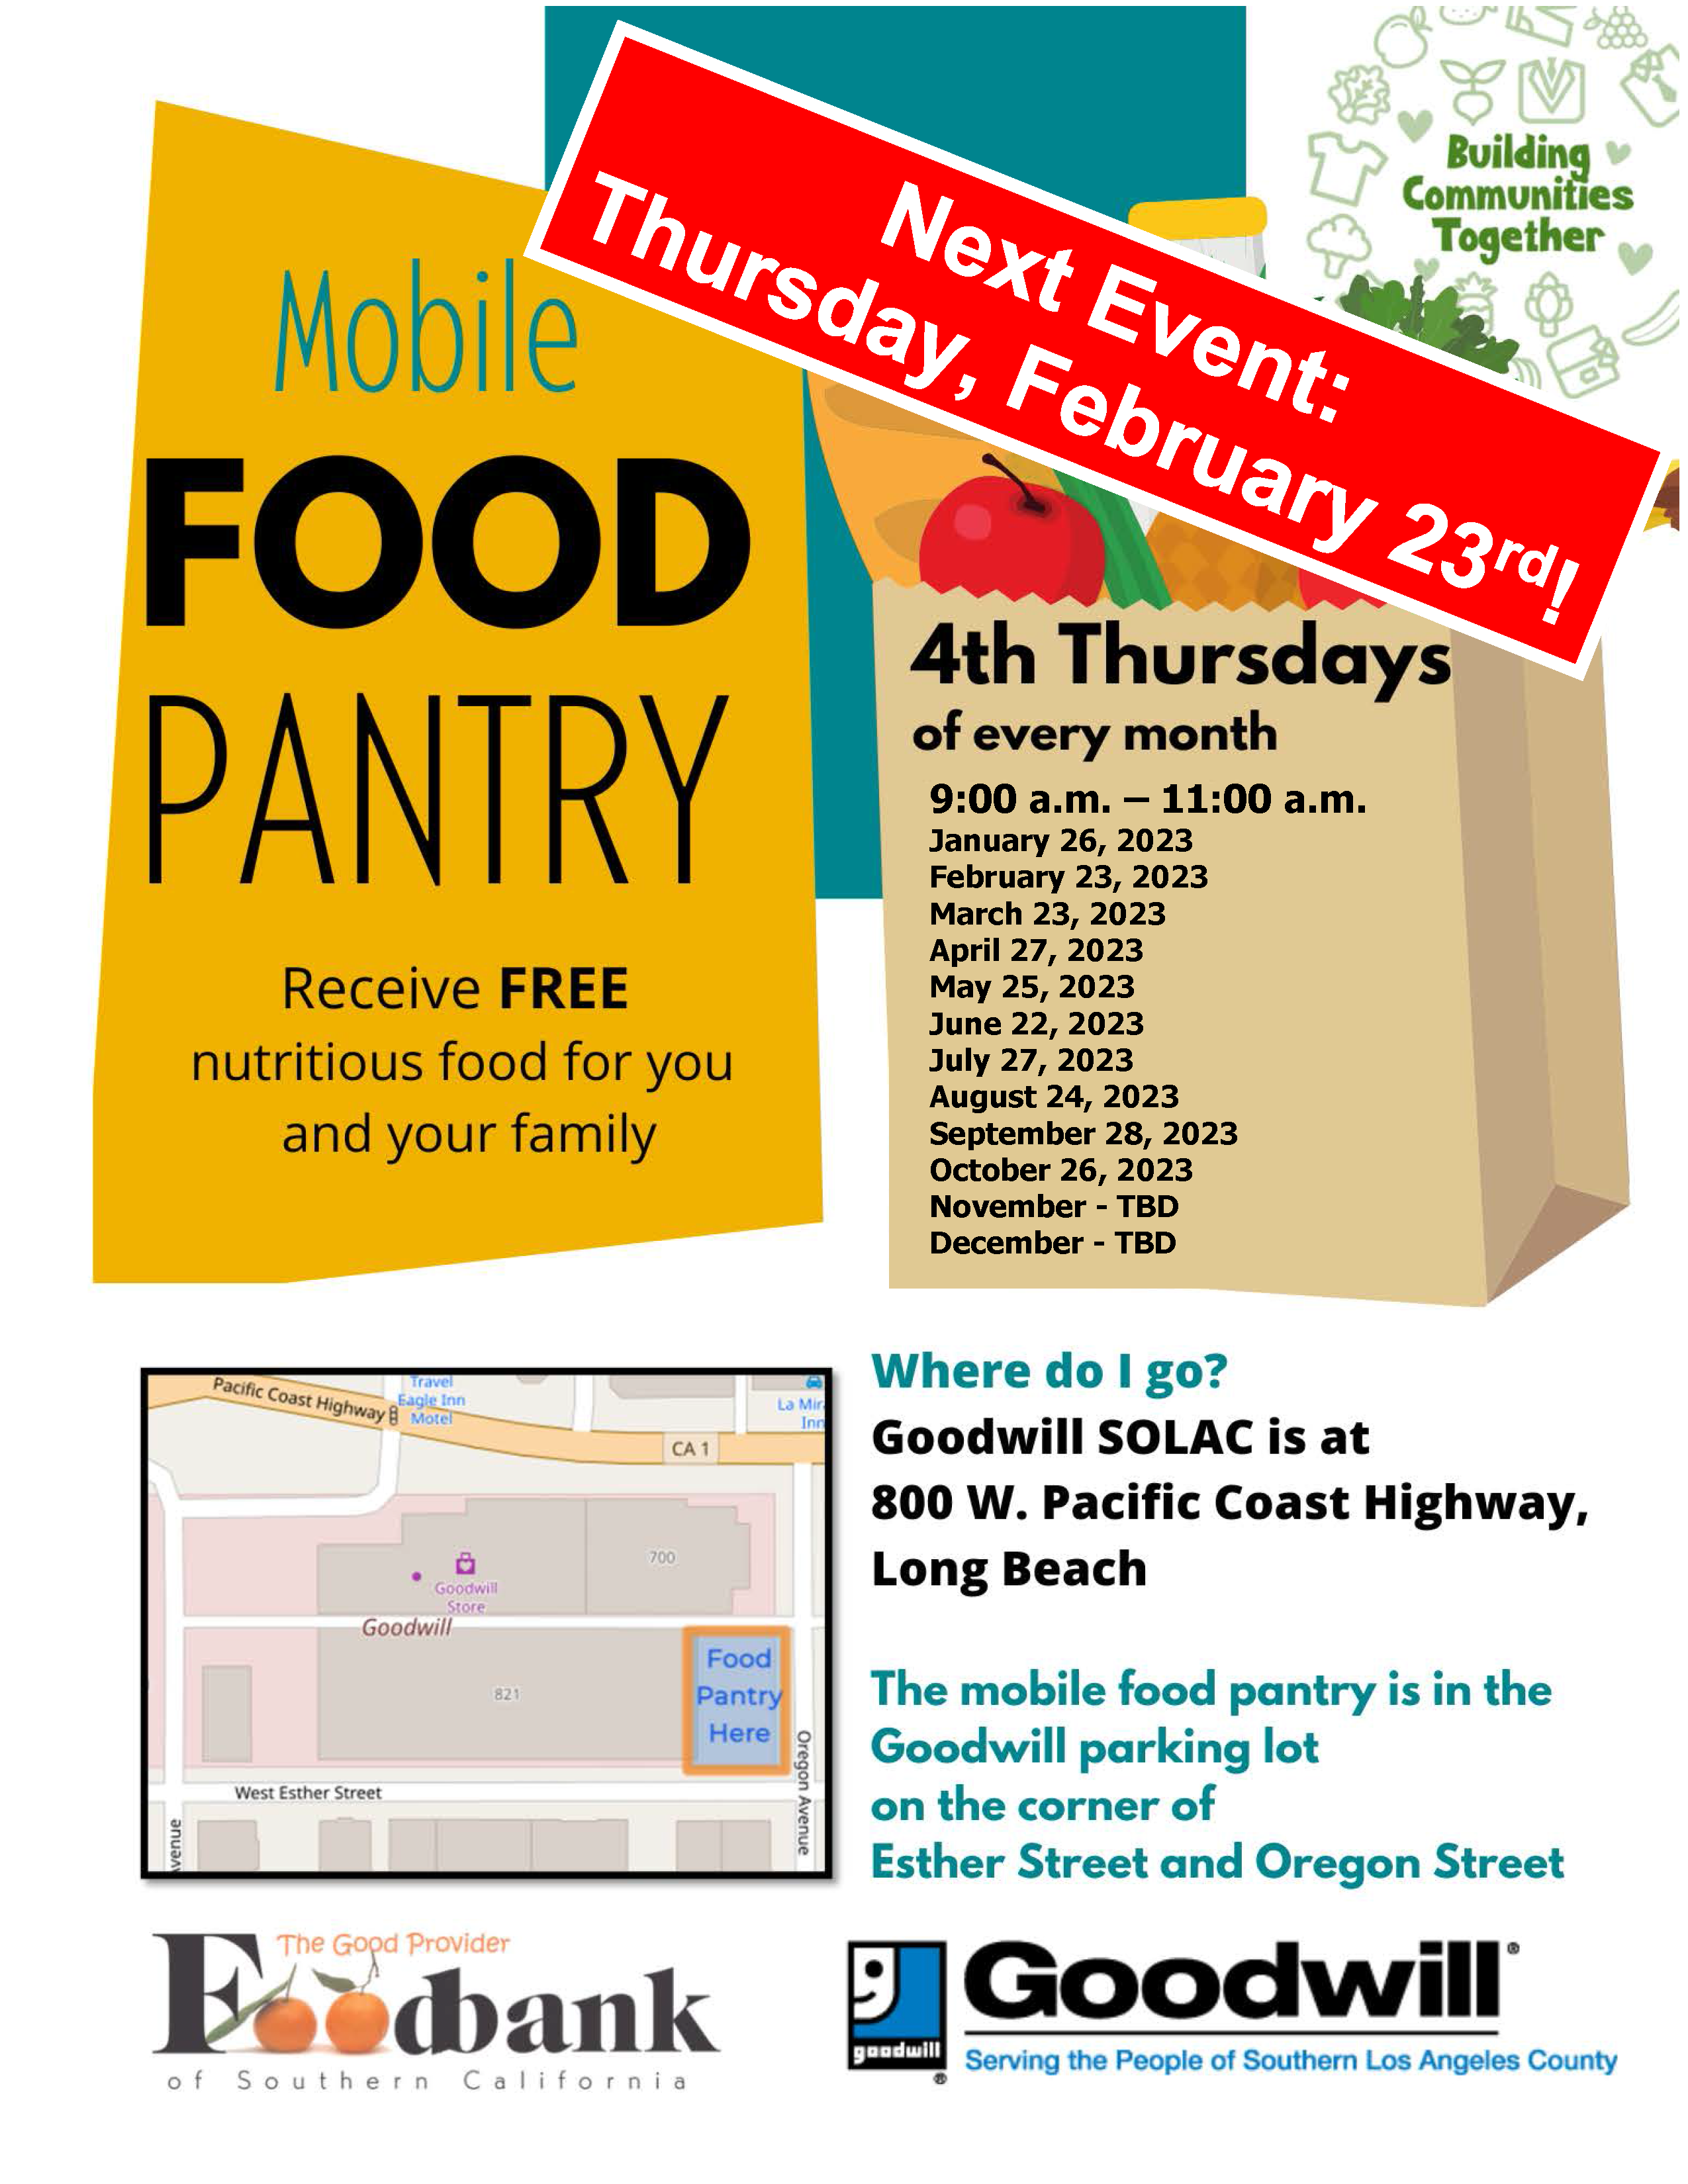 2023 Mobile Food Pantry: Free Nutritious Food For You & Your Family